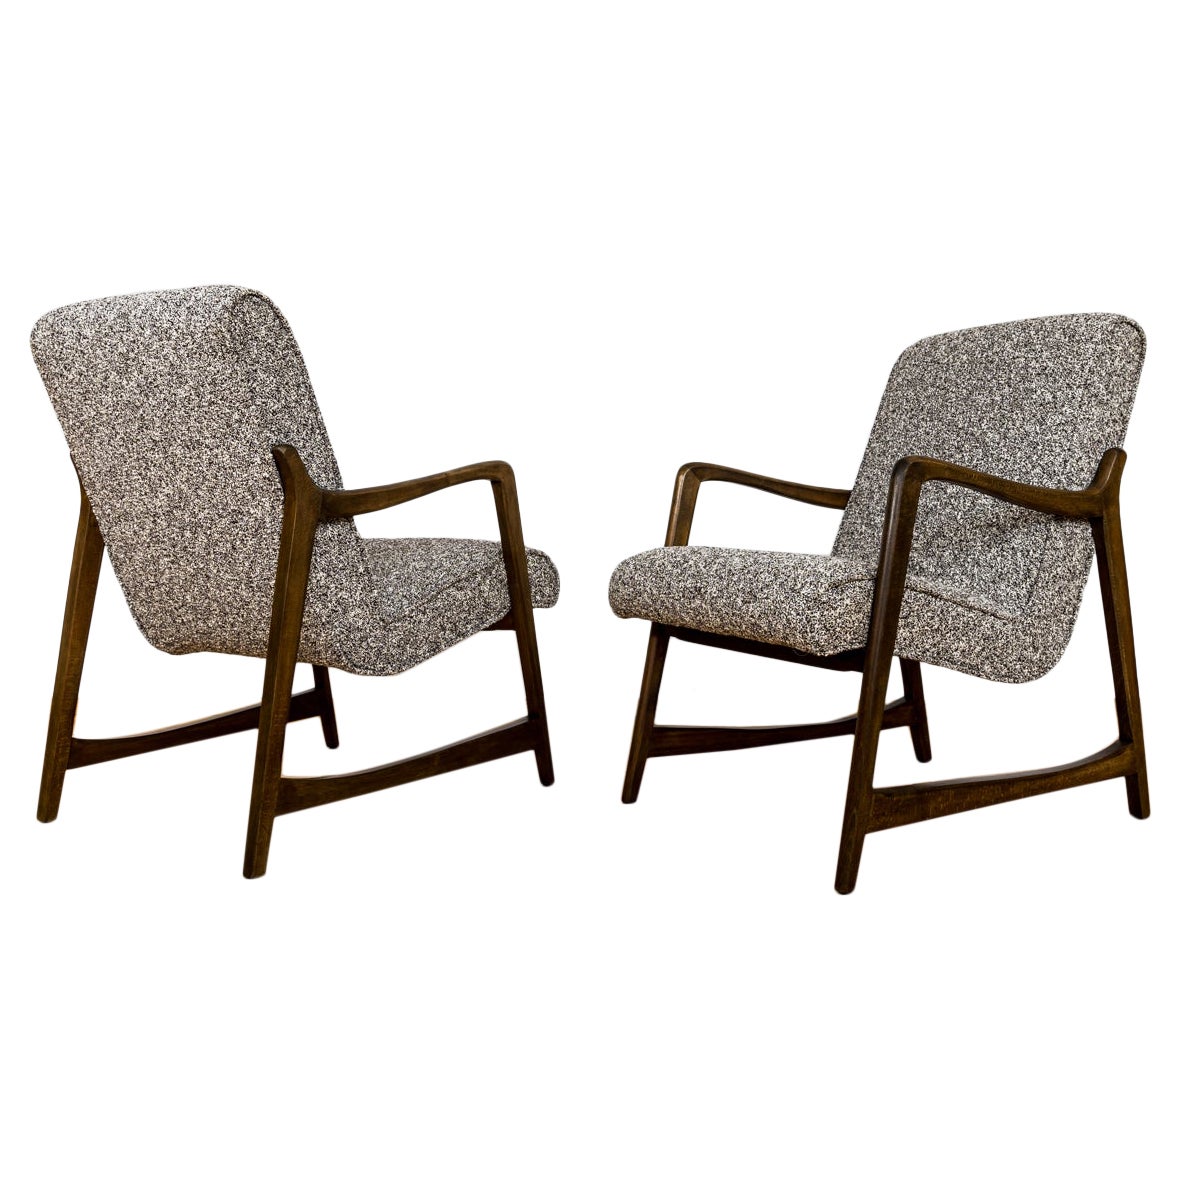 Pair Of Restored Mid Century Armchairs, Fabric by Kvadrat, 1960s For Sale